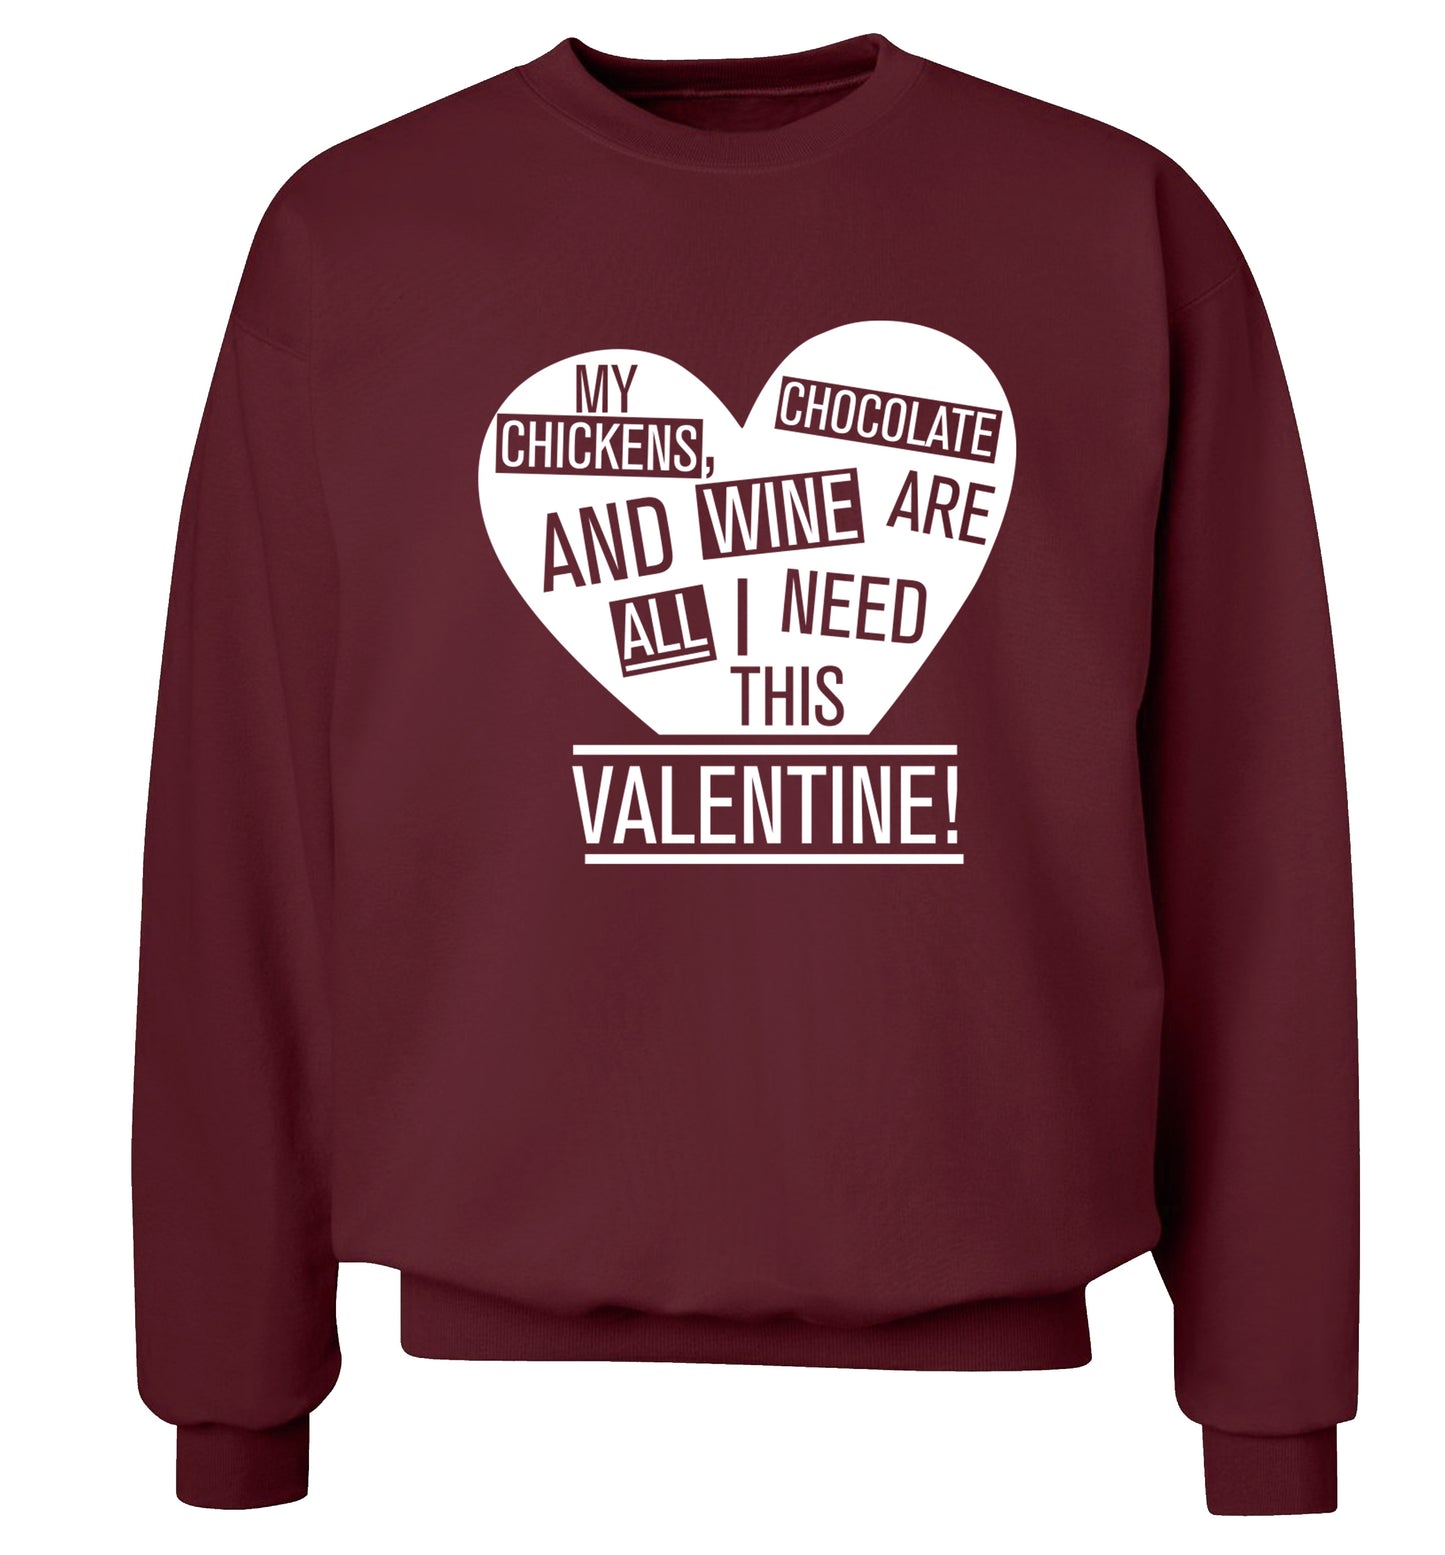 My chickens, chocolate and wine are all I need this valentine! Adult's unisex maroon Sweater 2XL